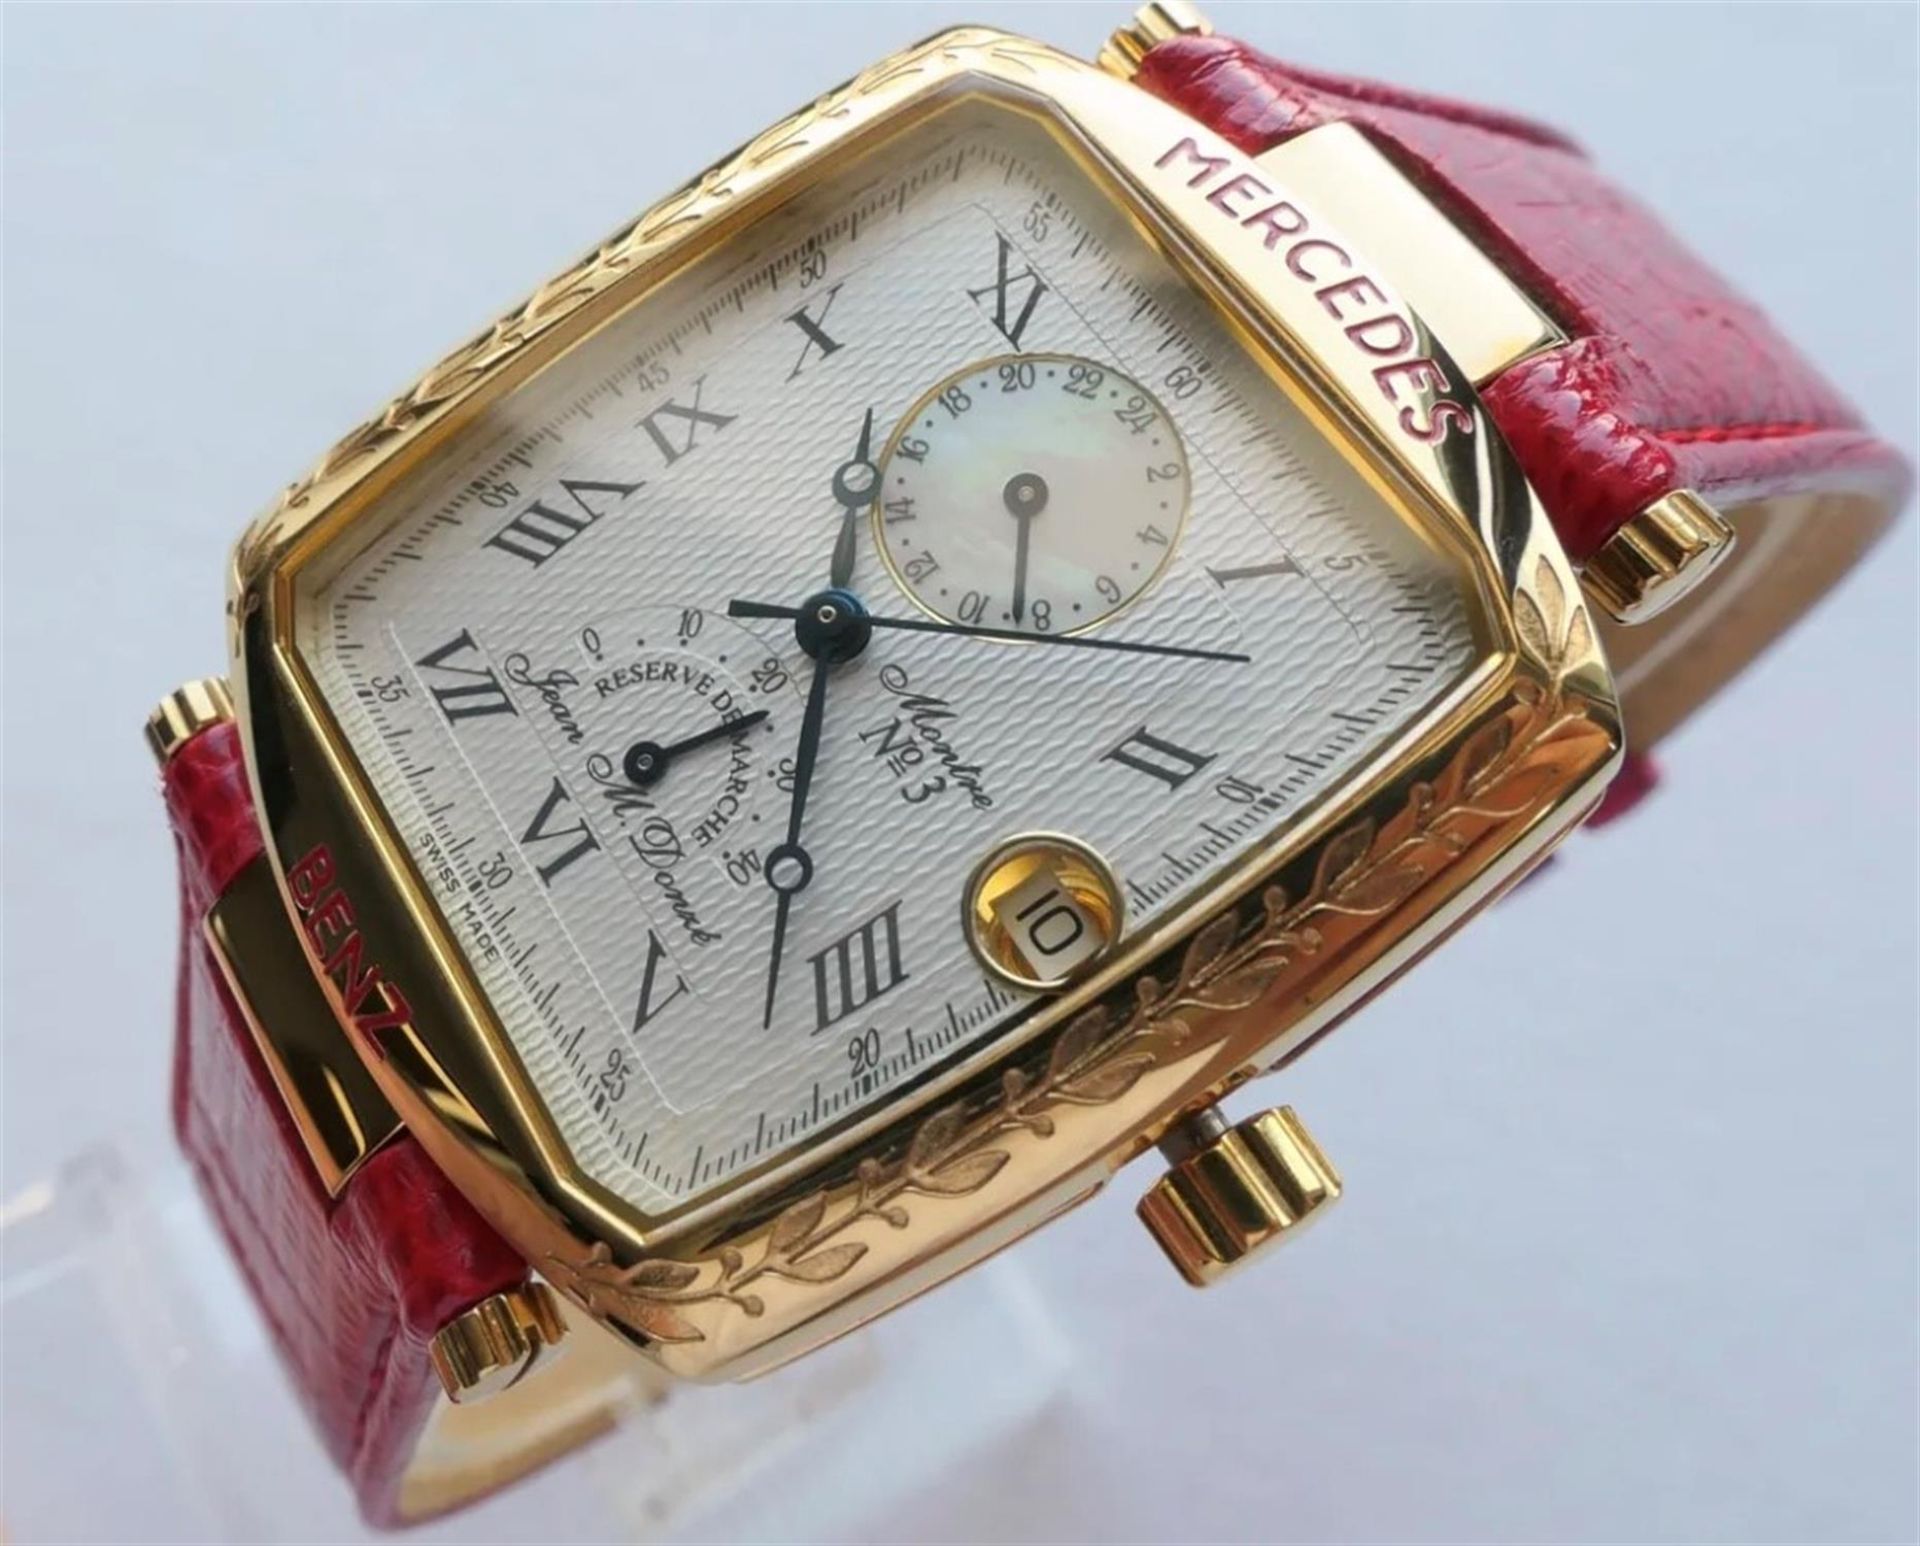 A 18ct Gold-Plated Mercedes-Benz Swiss-Made Automatic Wrist Watch - Image 6 of 10